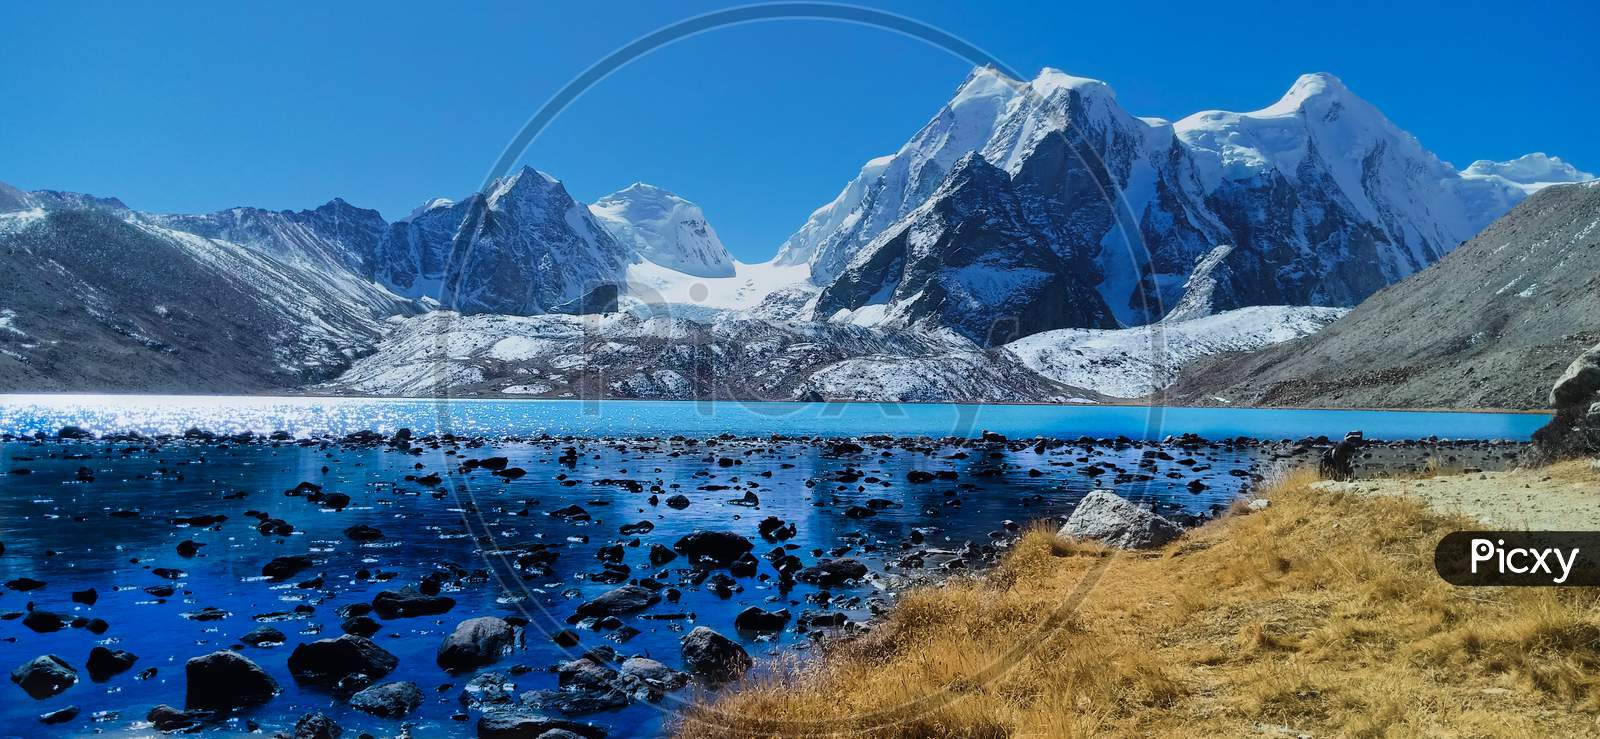 Closest View Of Gurudongmar Lake With Mountain In North Sikkim.